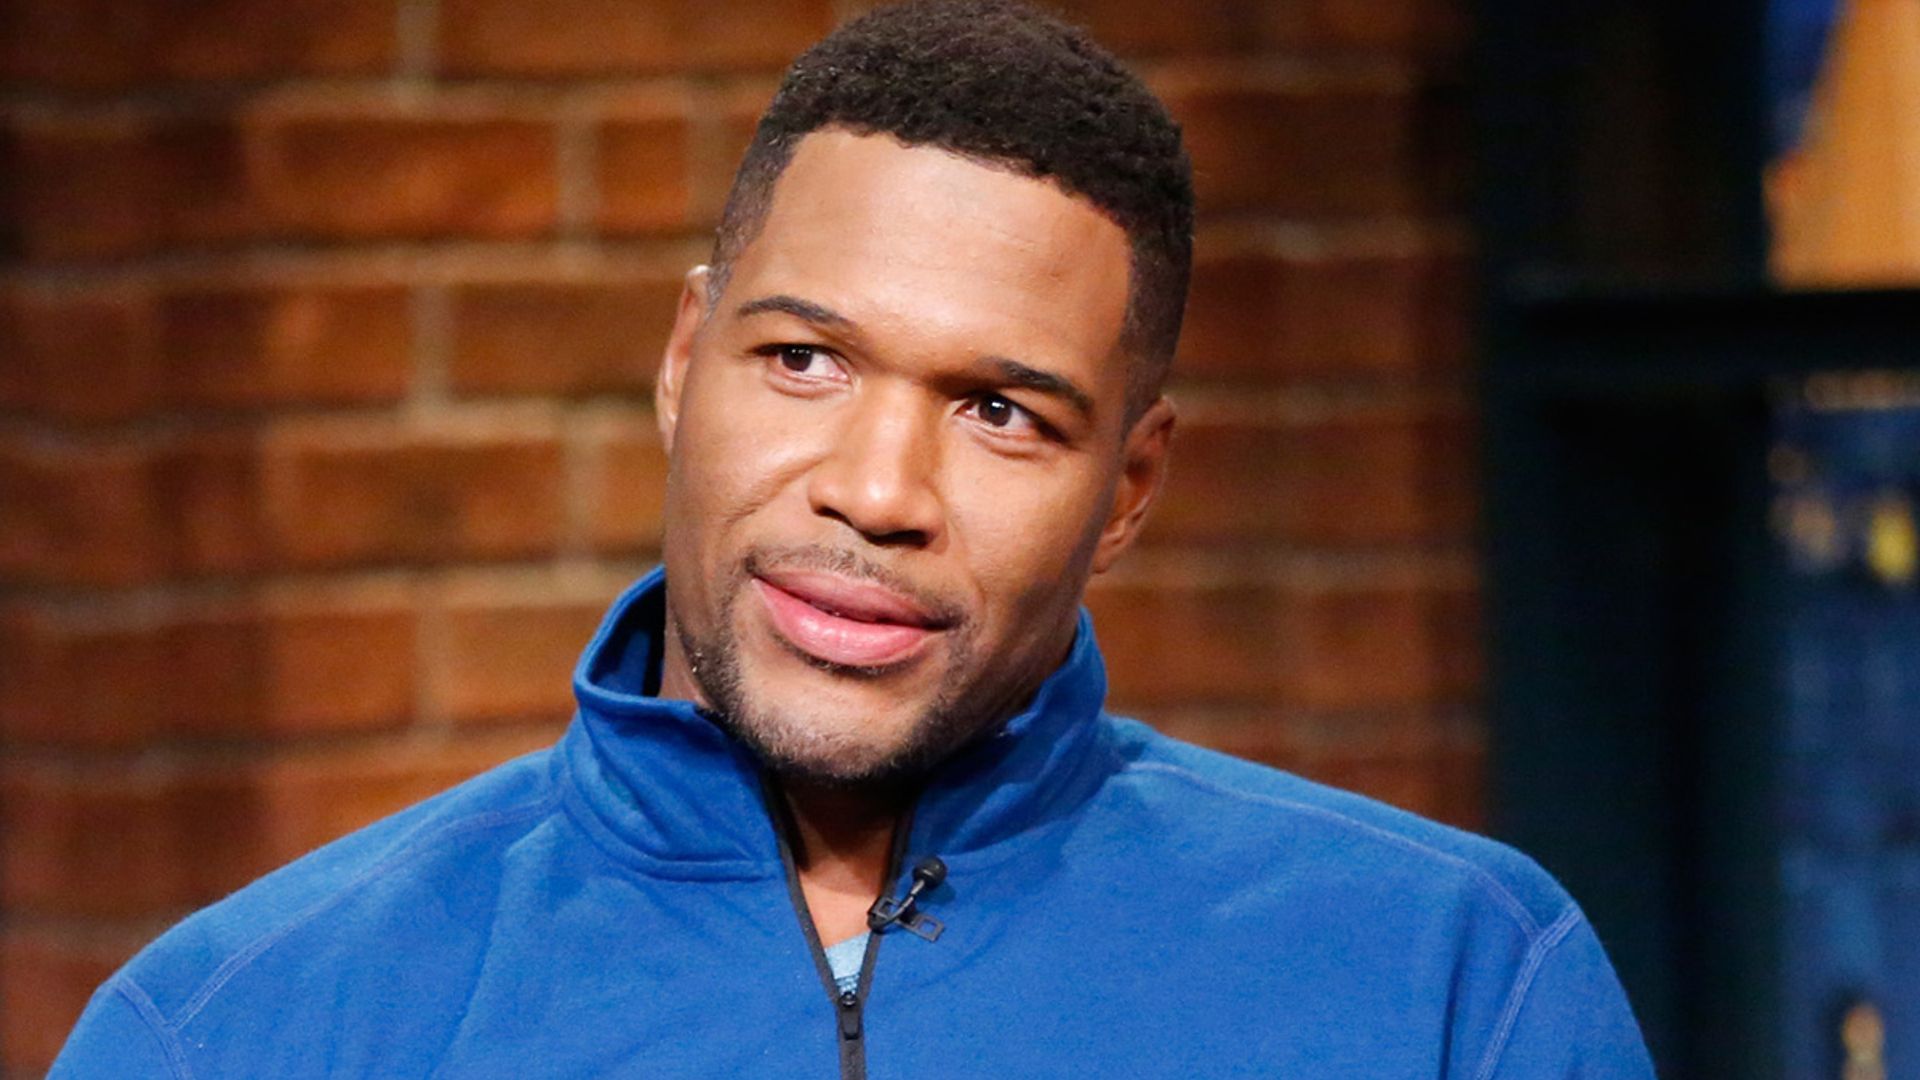 GMA's Michael Strahan reveals surprise new location during time off